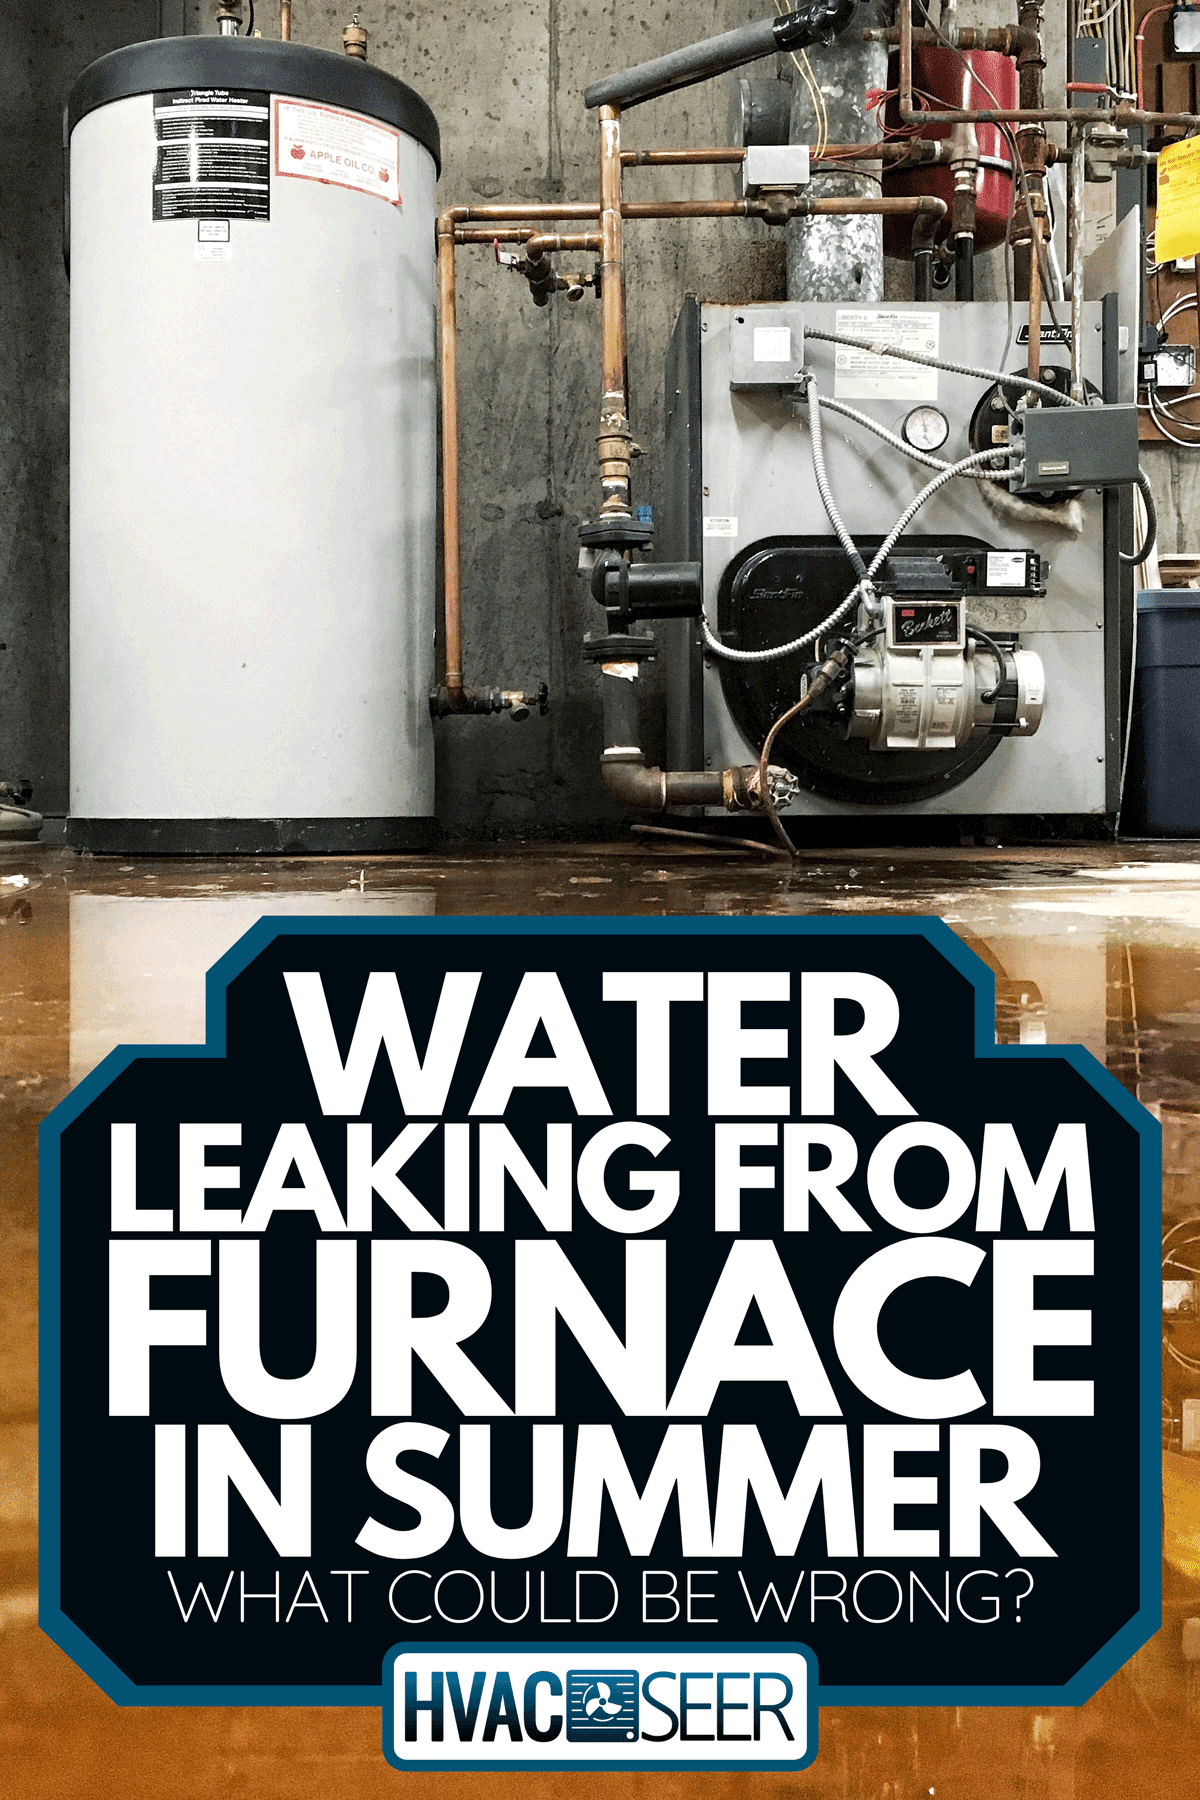 A burst pipe at the furnace and water tank has caused a leak on the basement floor, Water Leaking From Furnace In Summer - What Could Be Wrong?